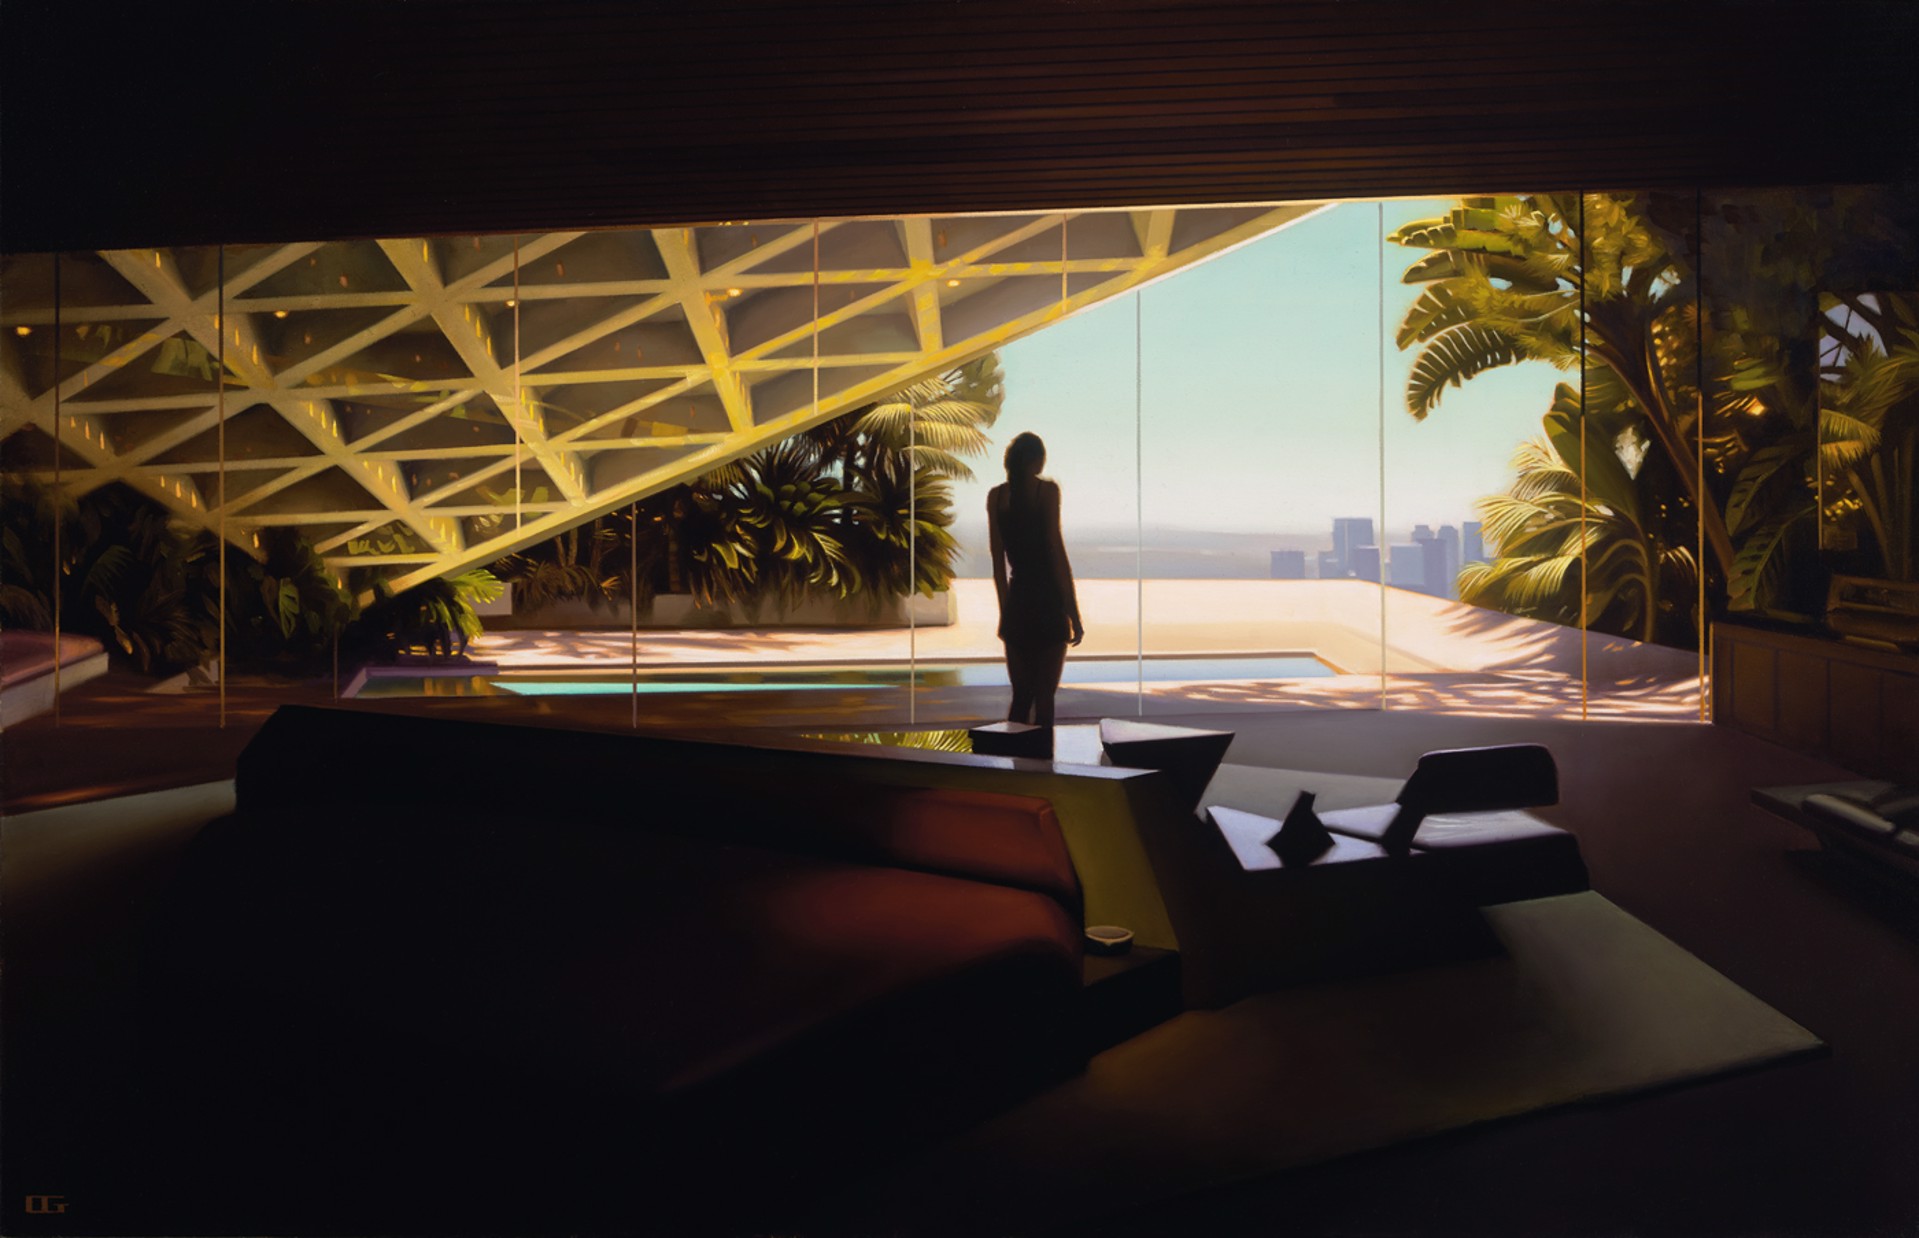 What the Future Holds (Sheats-Goldstein Residence) (S/N) by Carrie Graber